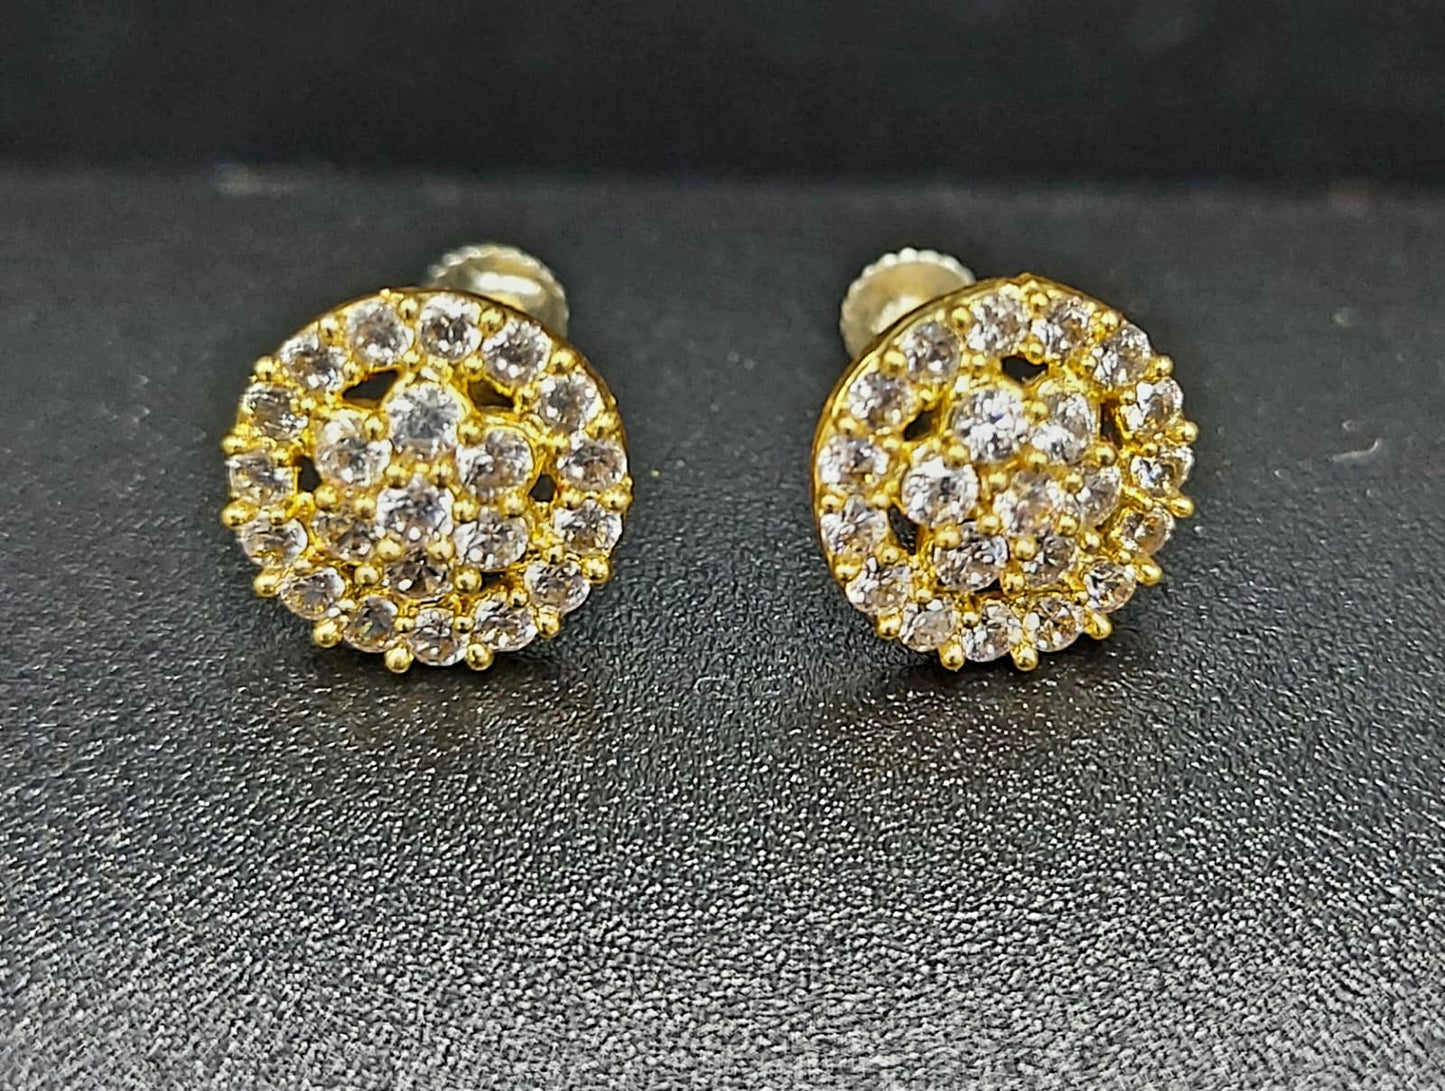 "Timeless Sparkle: White Zirconia Nose and Ear Studs